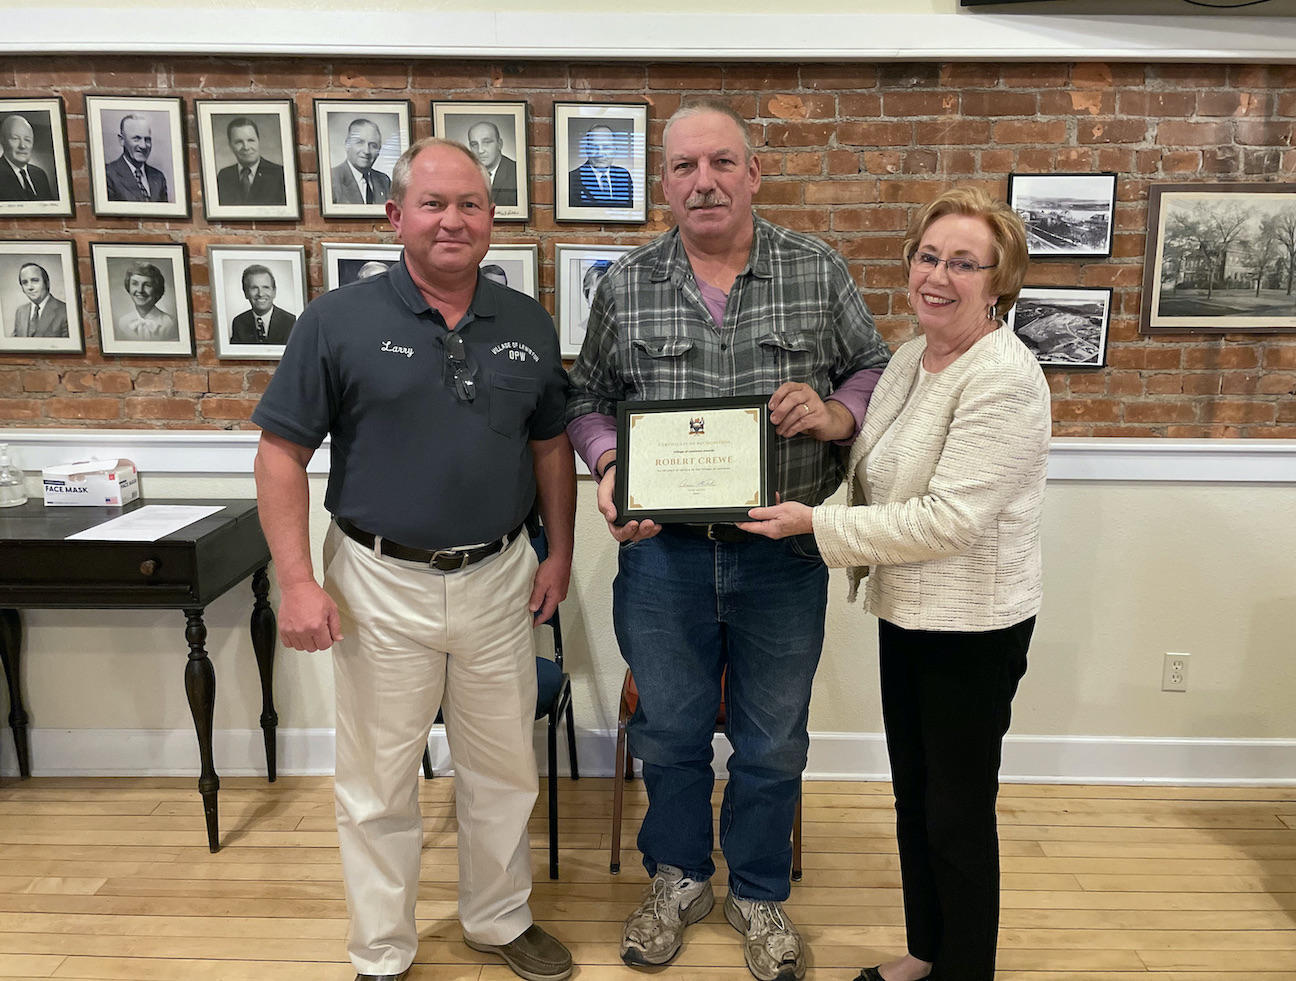 Pictured, from left: Department of Public Works Superintendent Larry Wills, Robert Crewe and Mayor Anne Welch. Crewe was recognized for 30 years of service to the village.